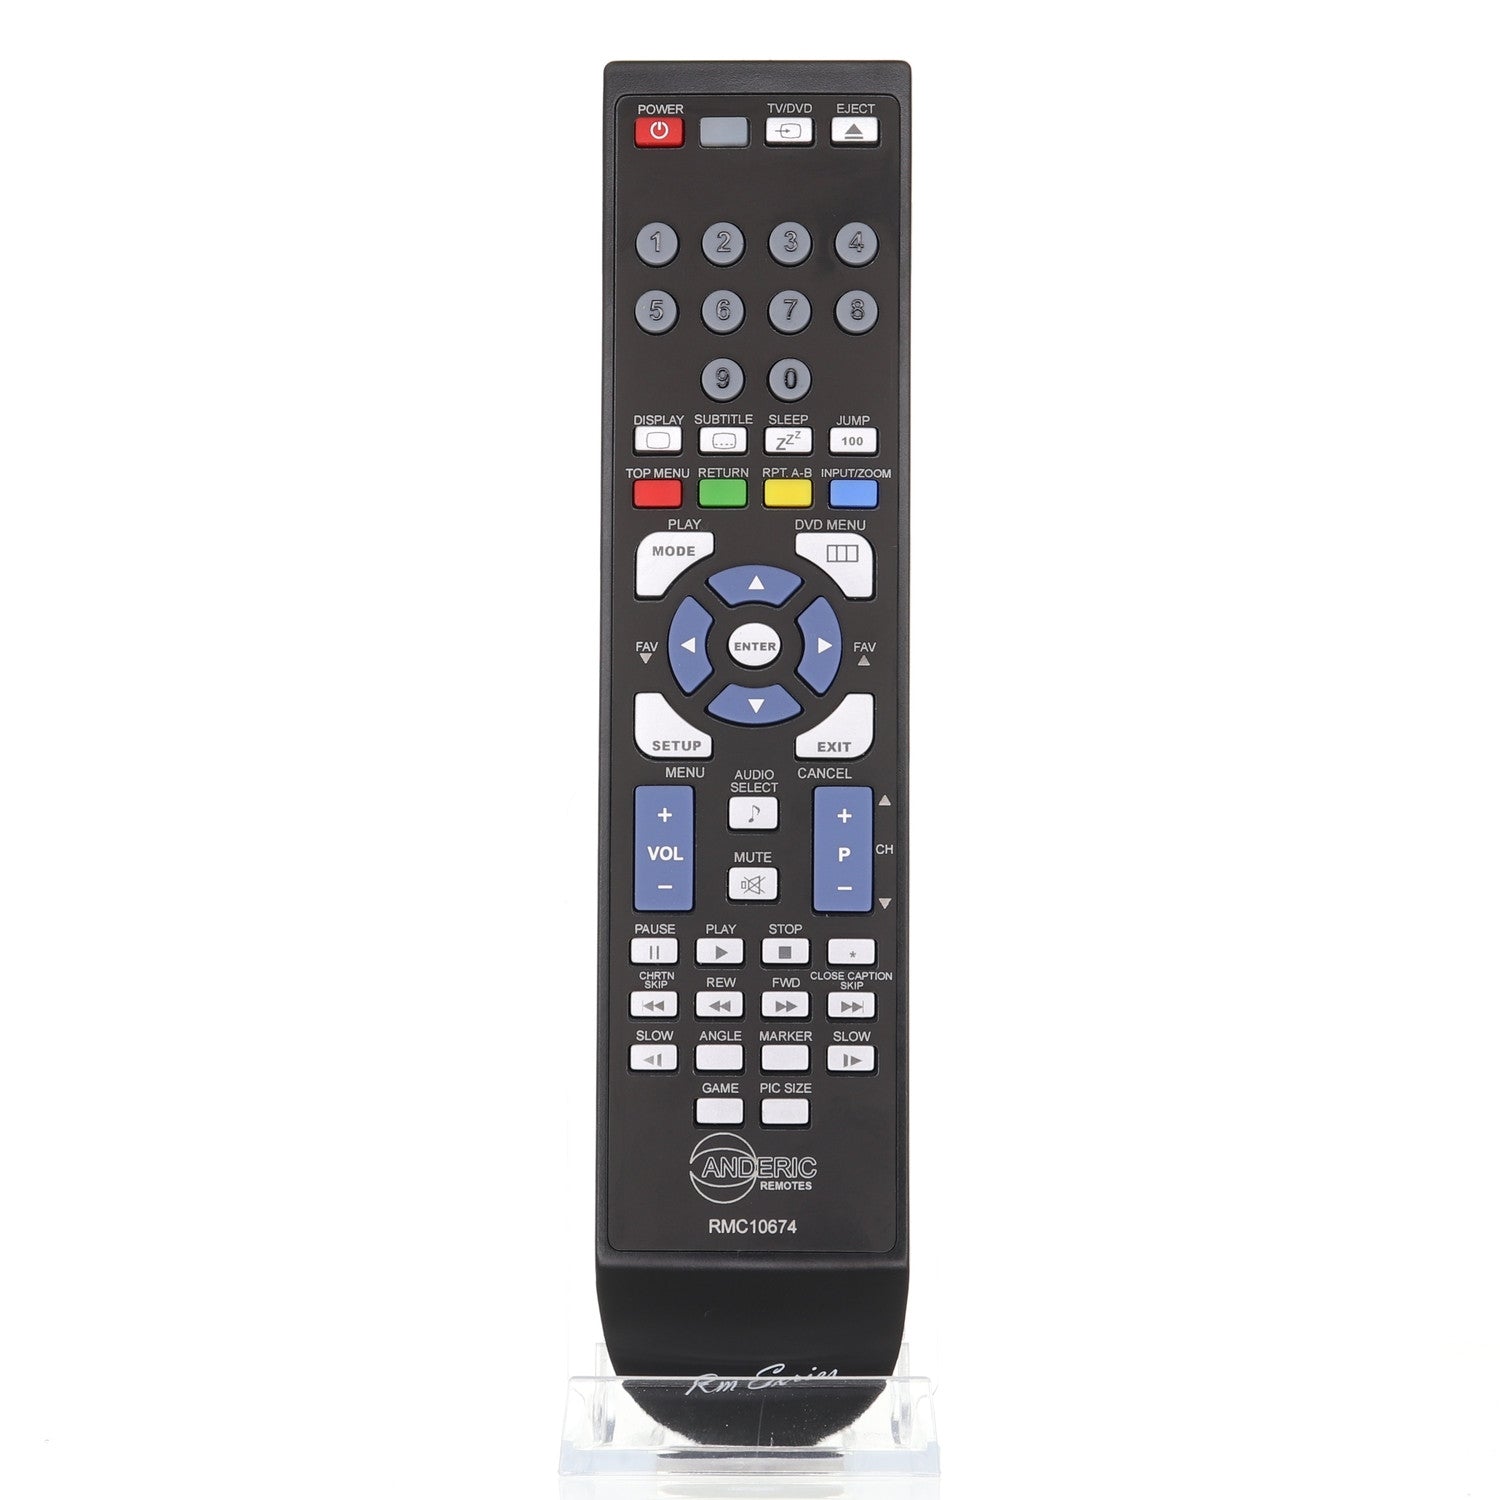 RMC10674 Remote Control for Toshiba® TV with built-in DVD Players